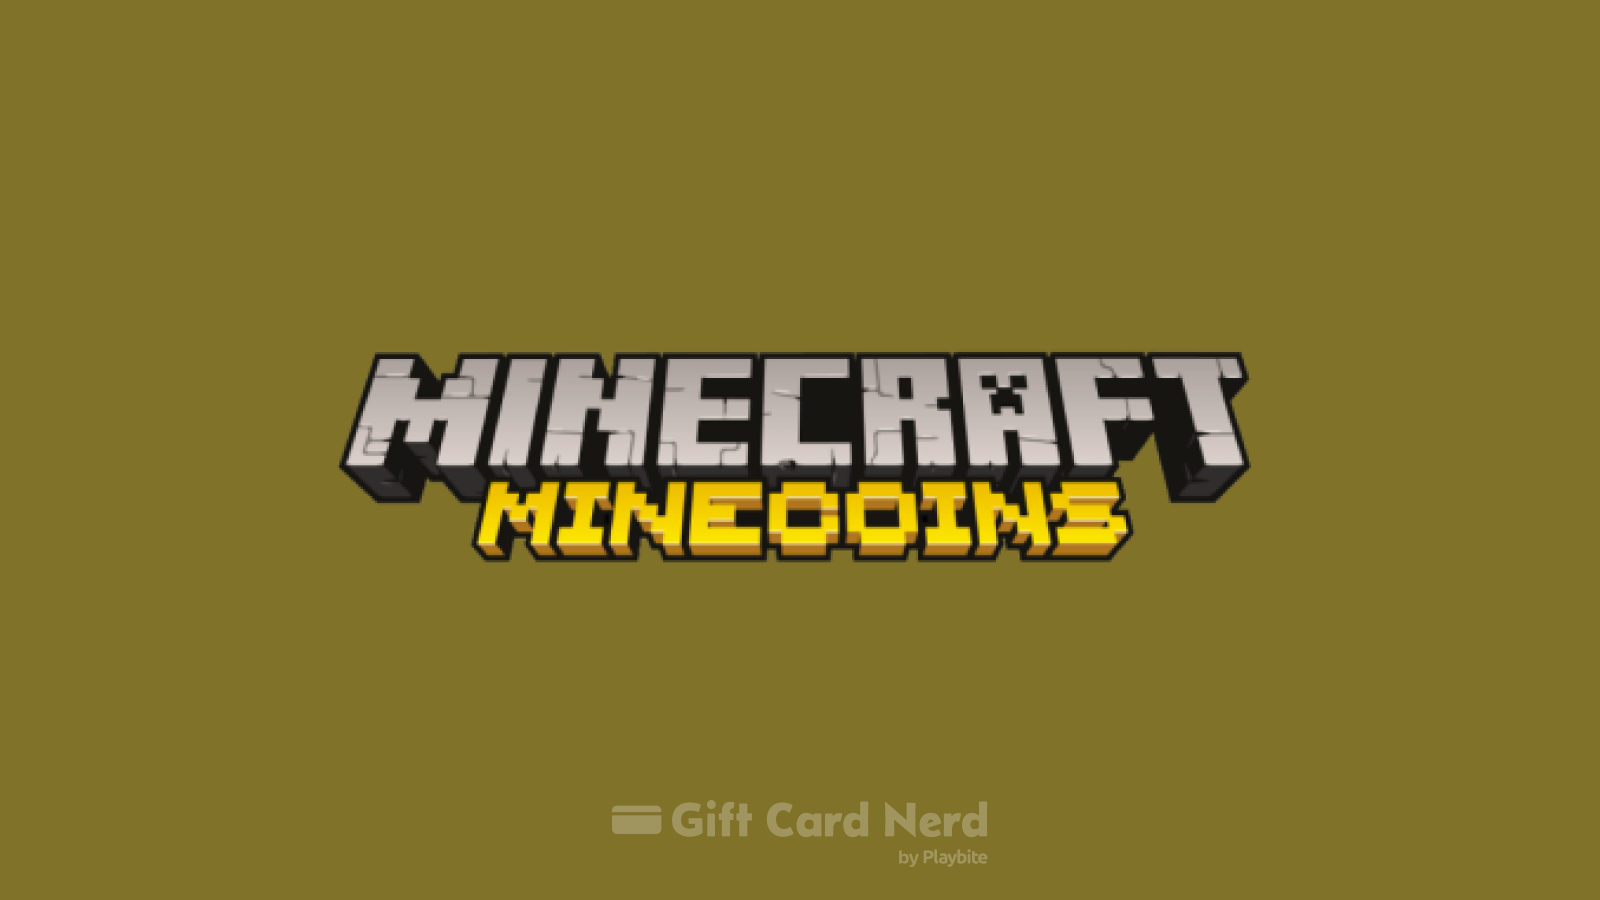 Can You Use a Minecraft Gift Card on Paypal?